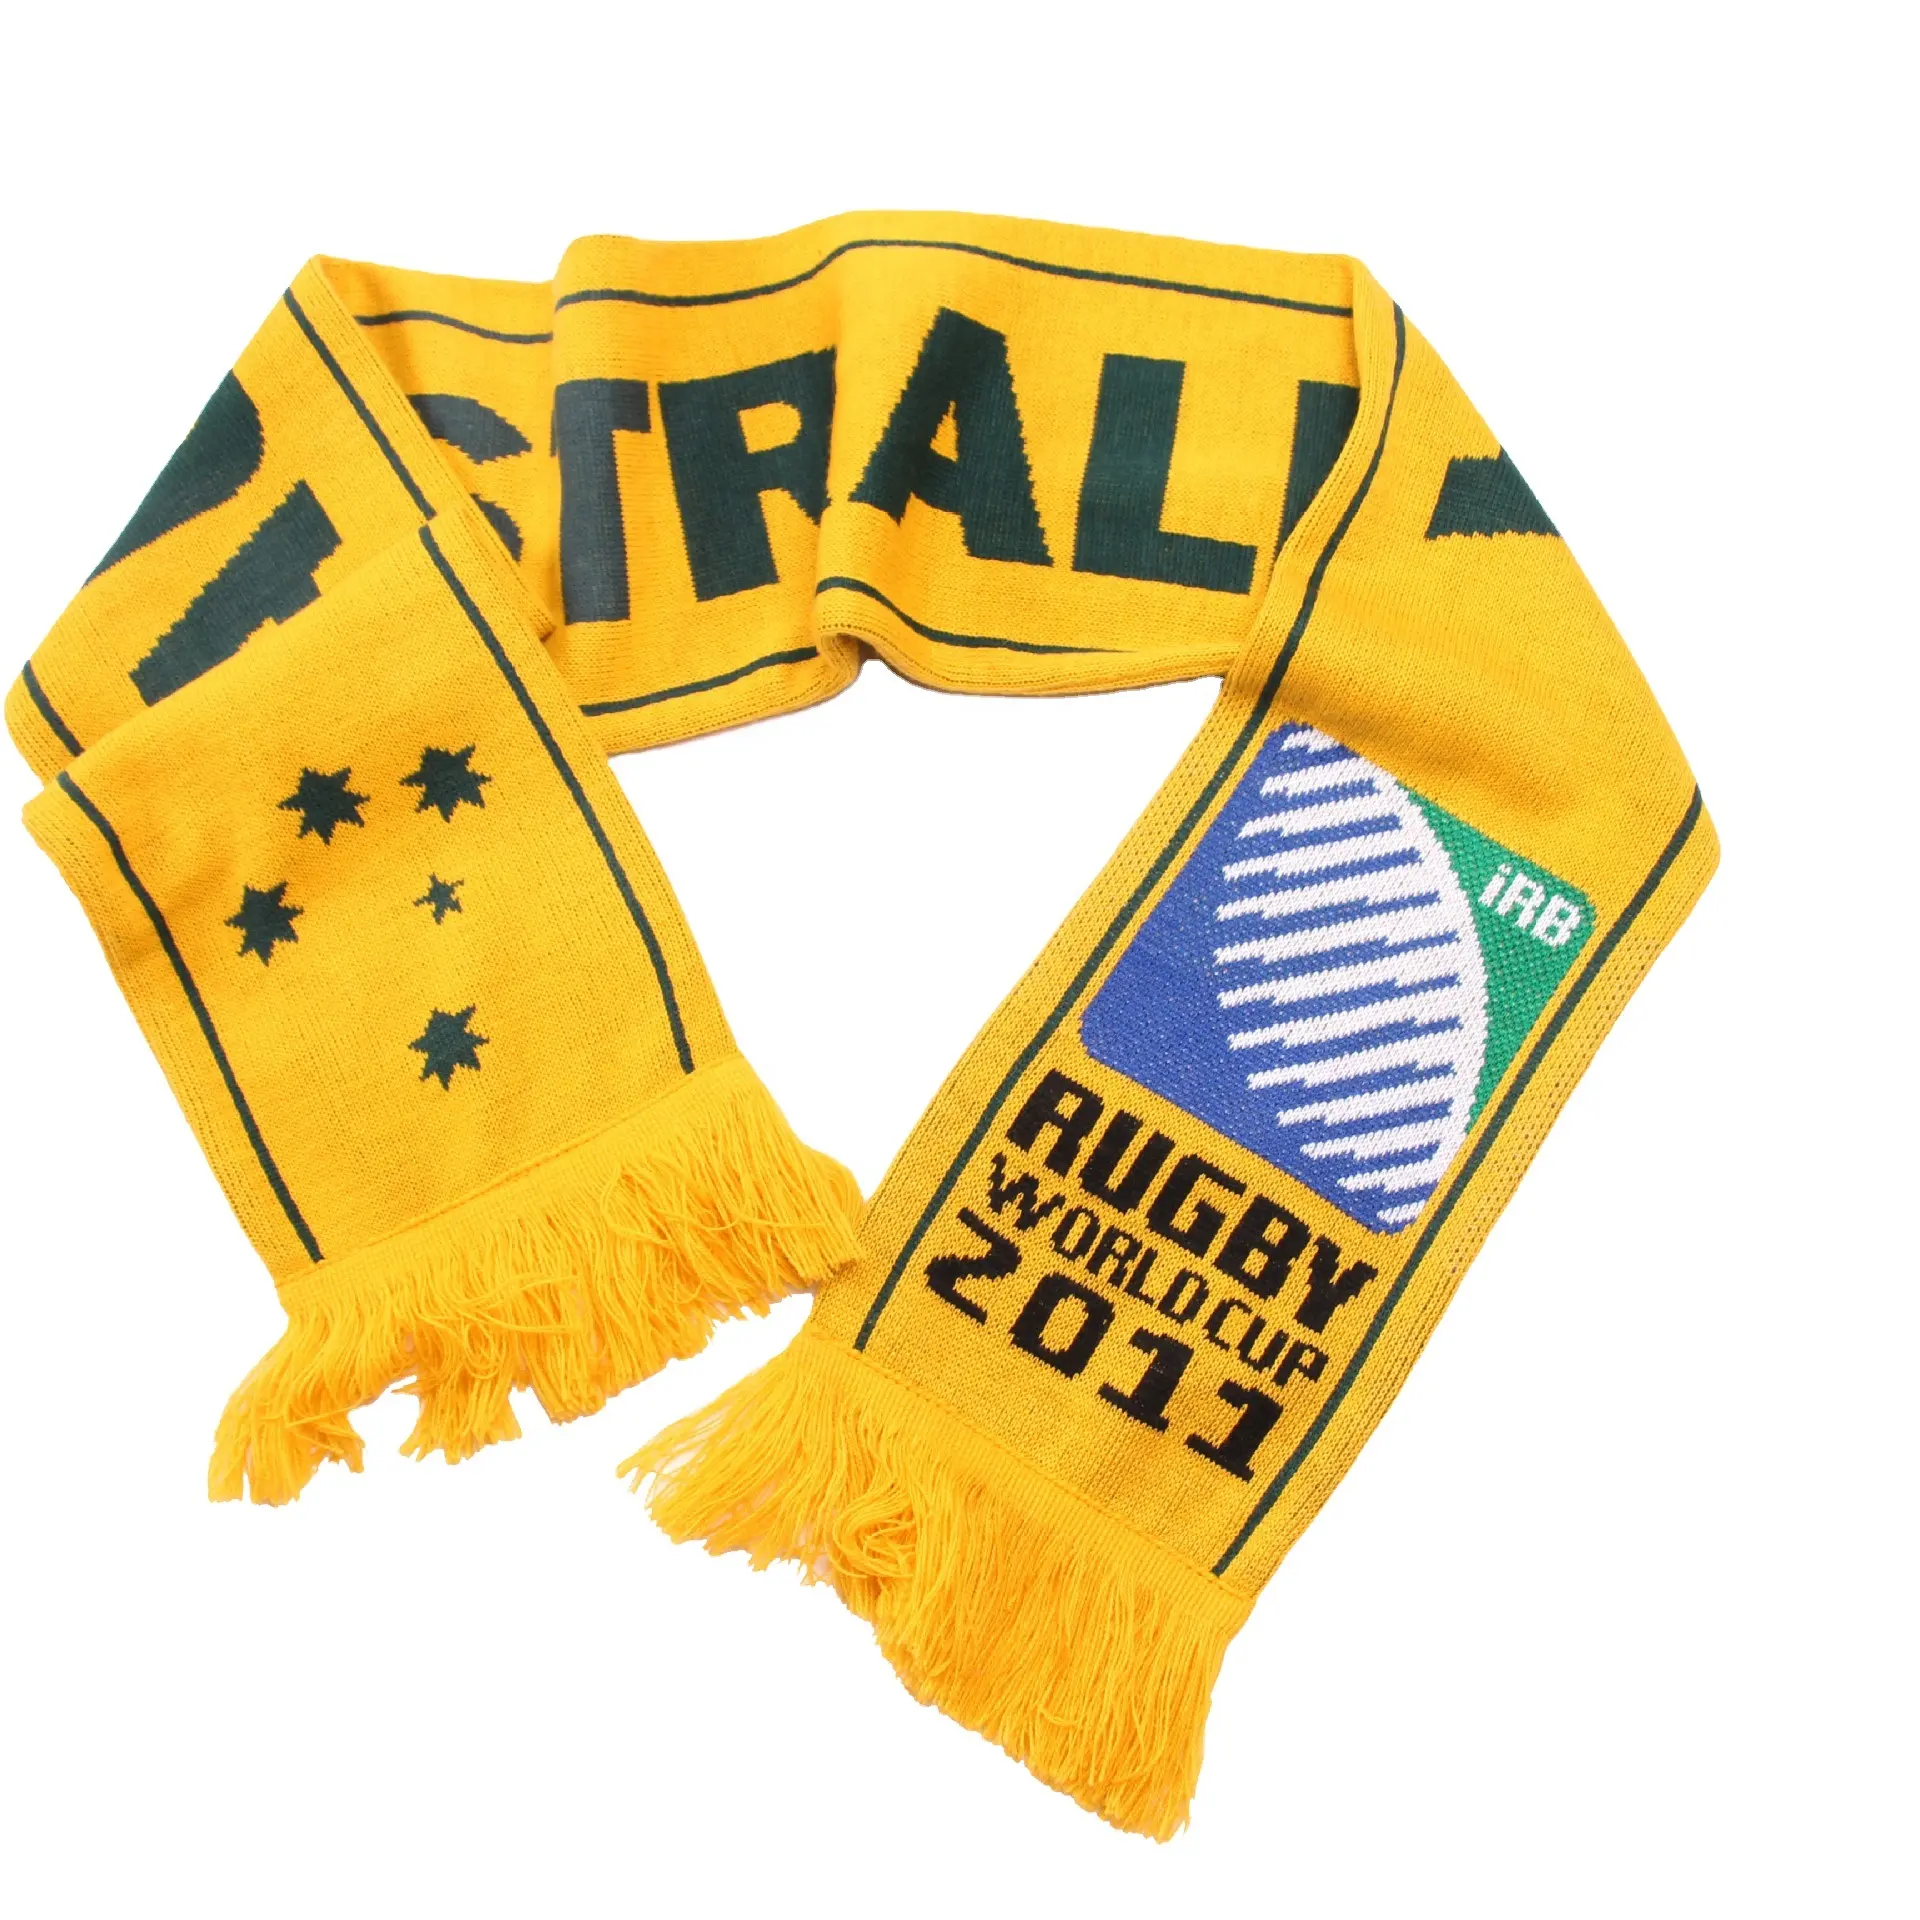 Custom Jacquard 100% Acrylic Knitted Embroidered Football Sports Fans Club Scarf Soccer Fan Scarves